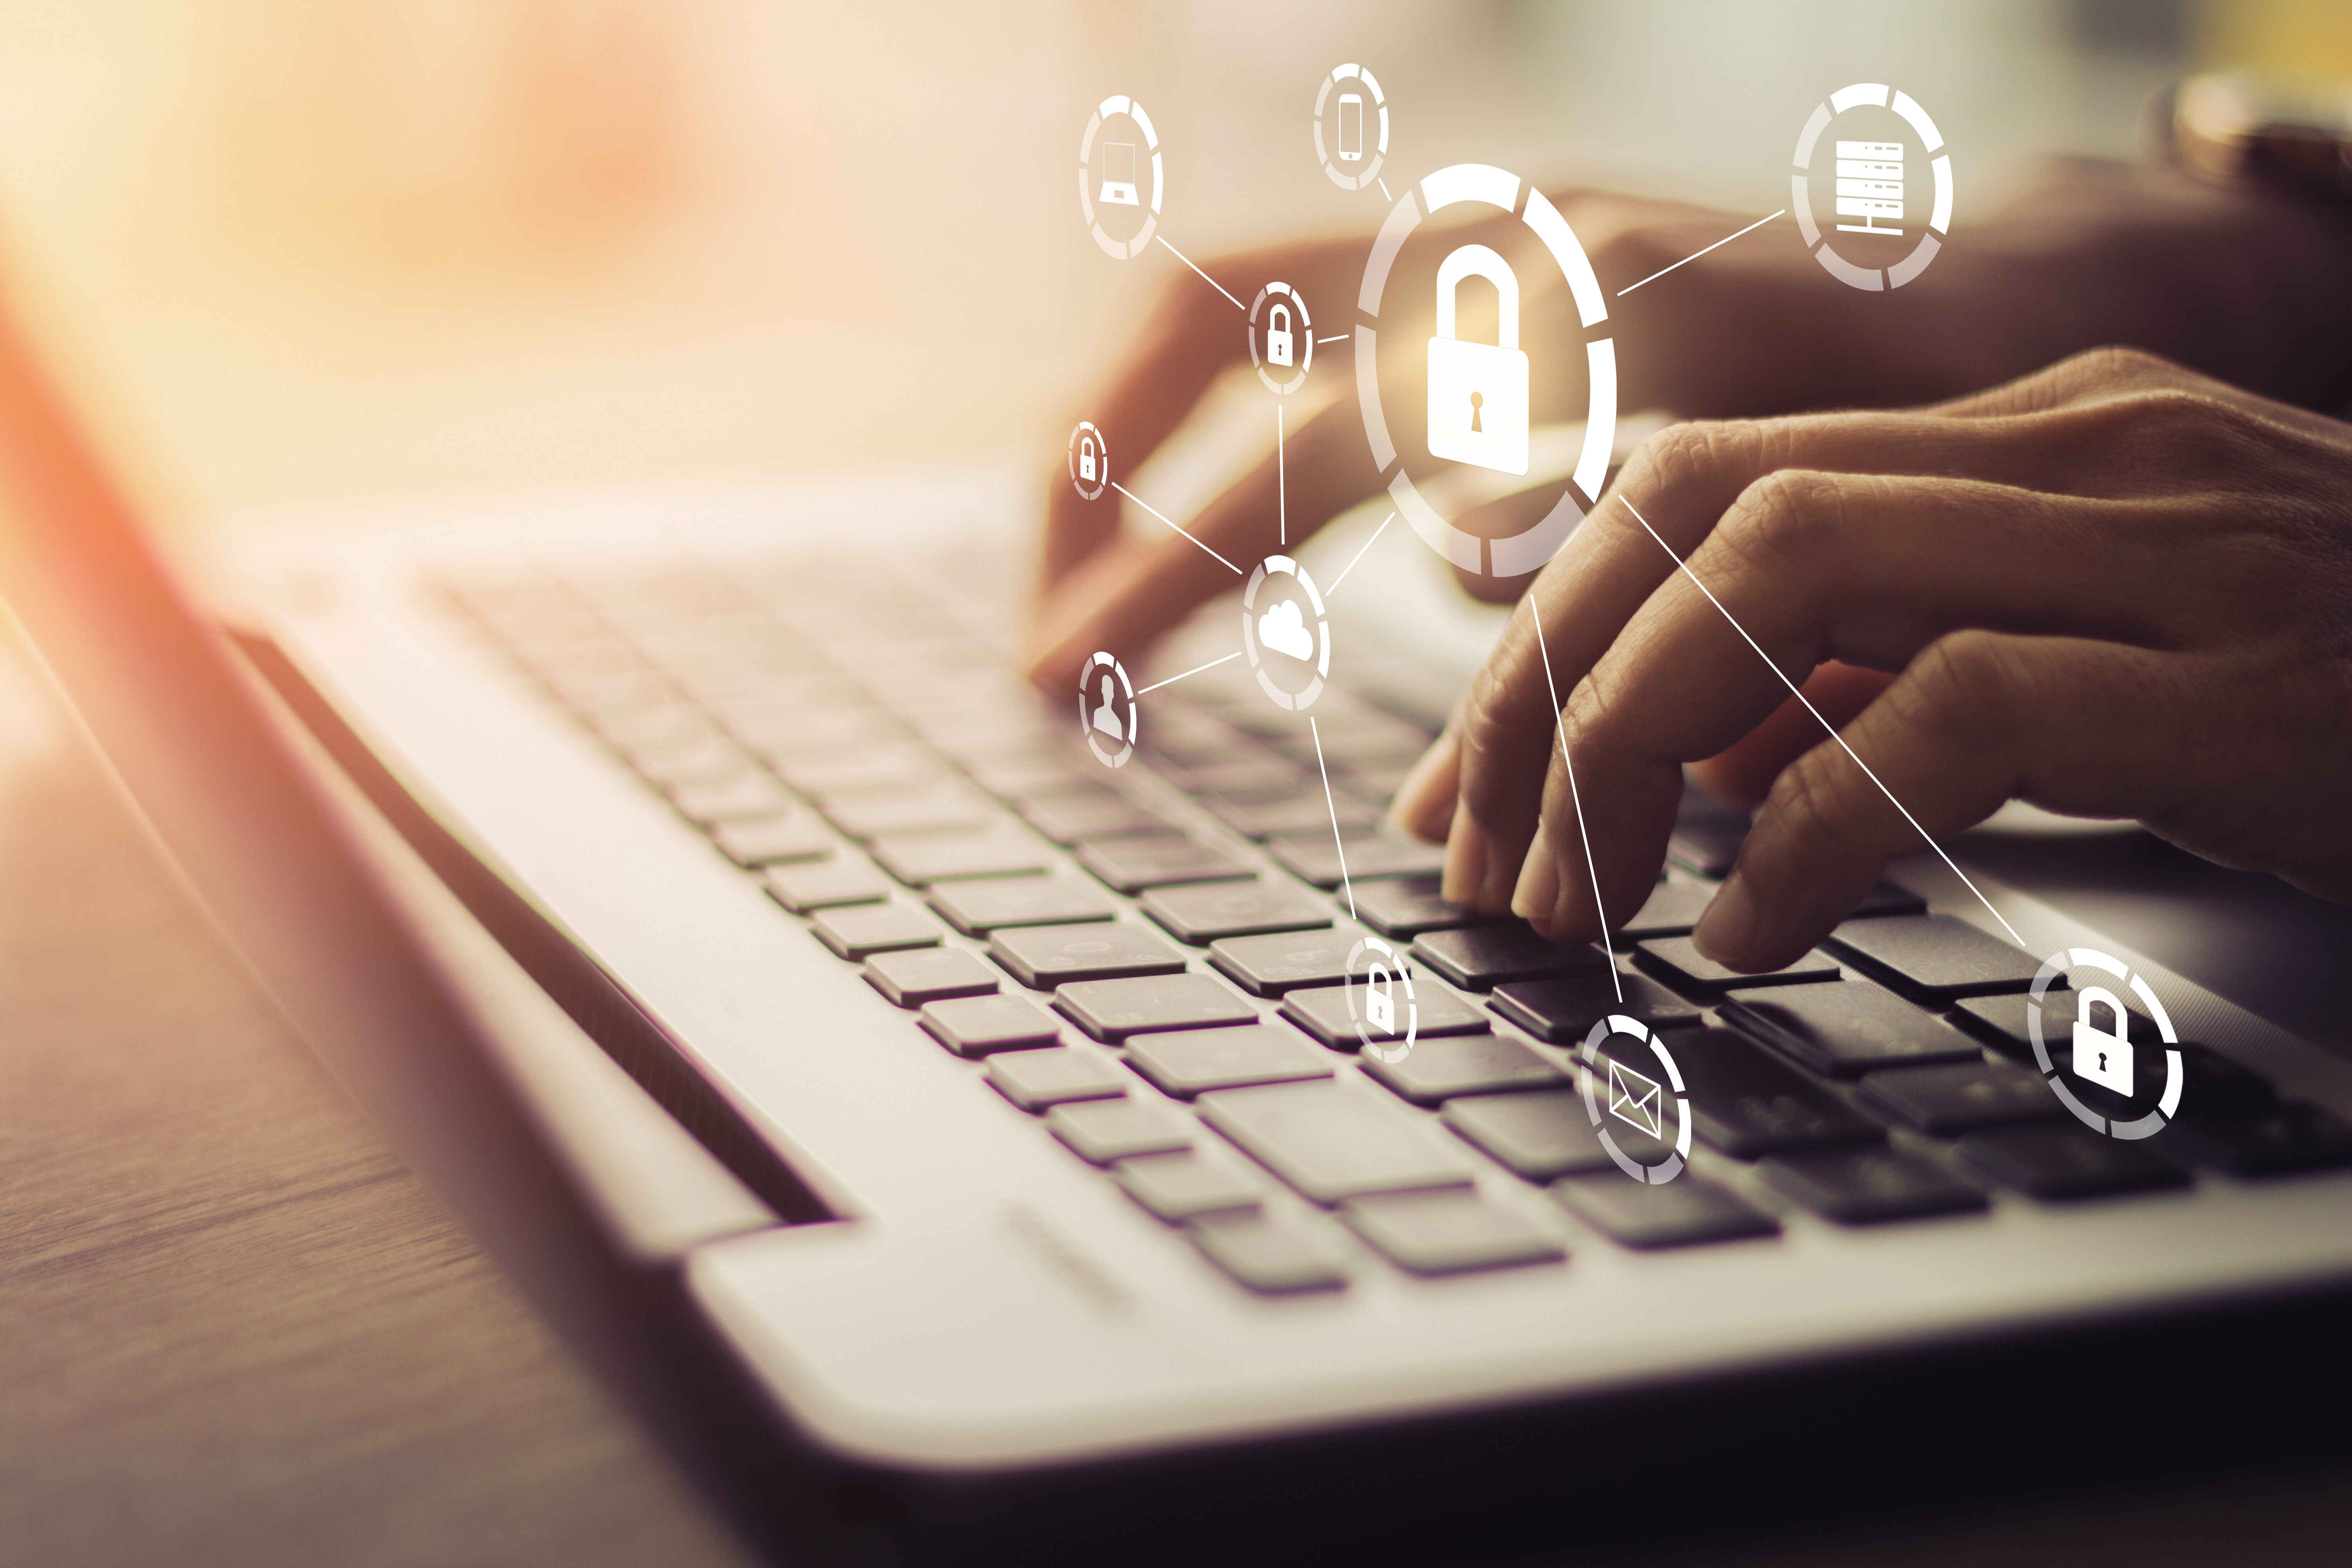 4 Essential Tips for Ensuring Your Documents and Data Are Secure